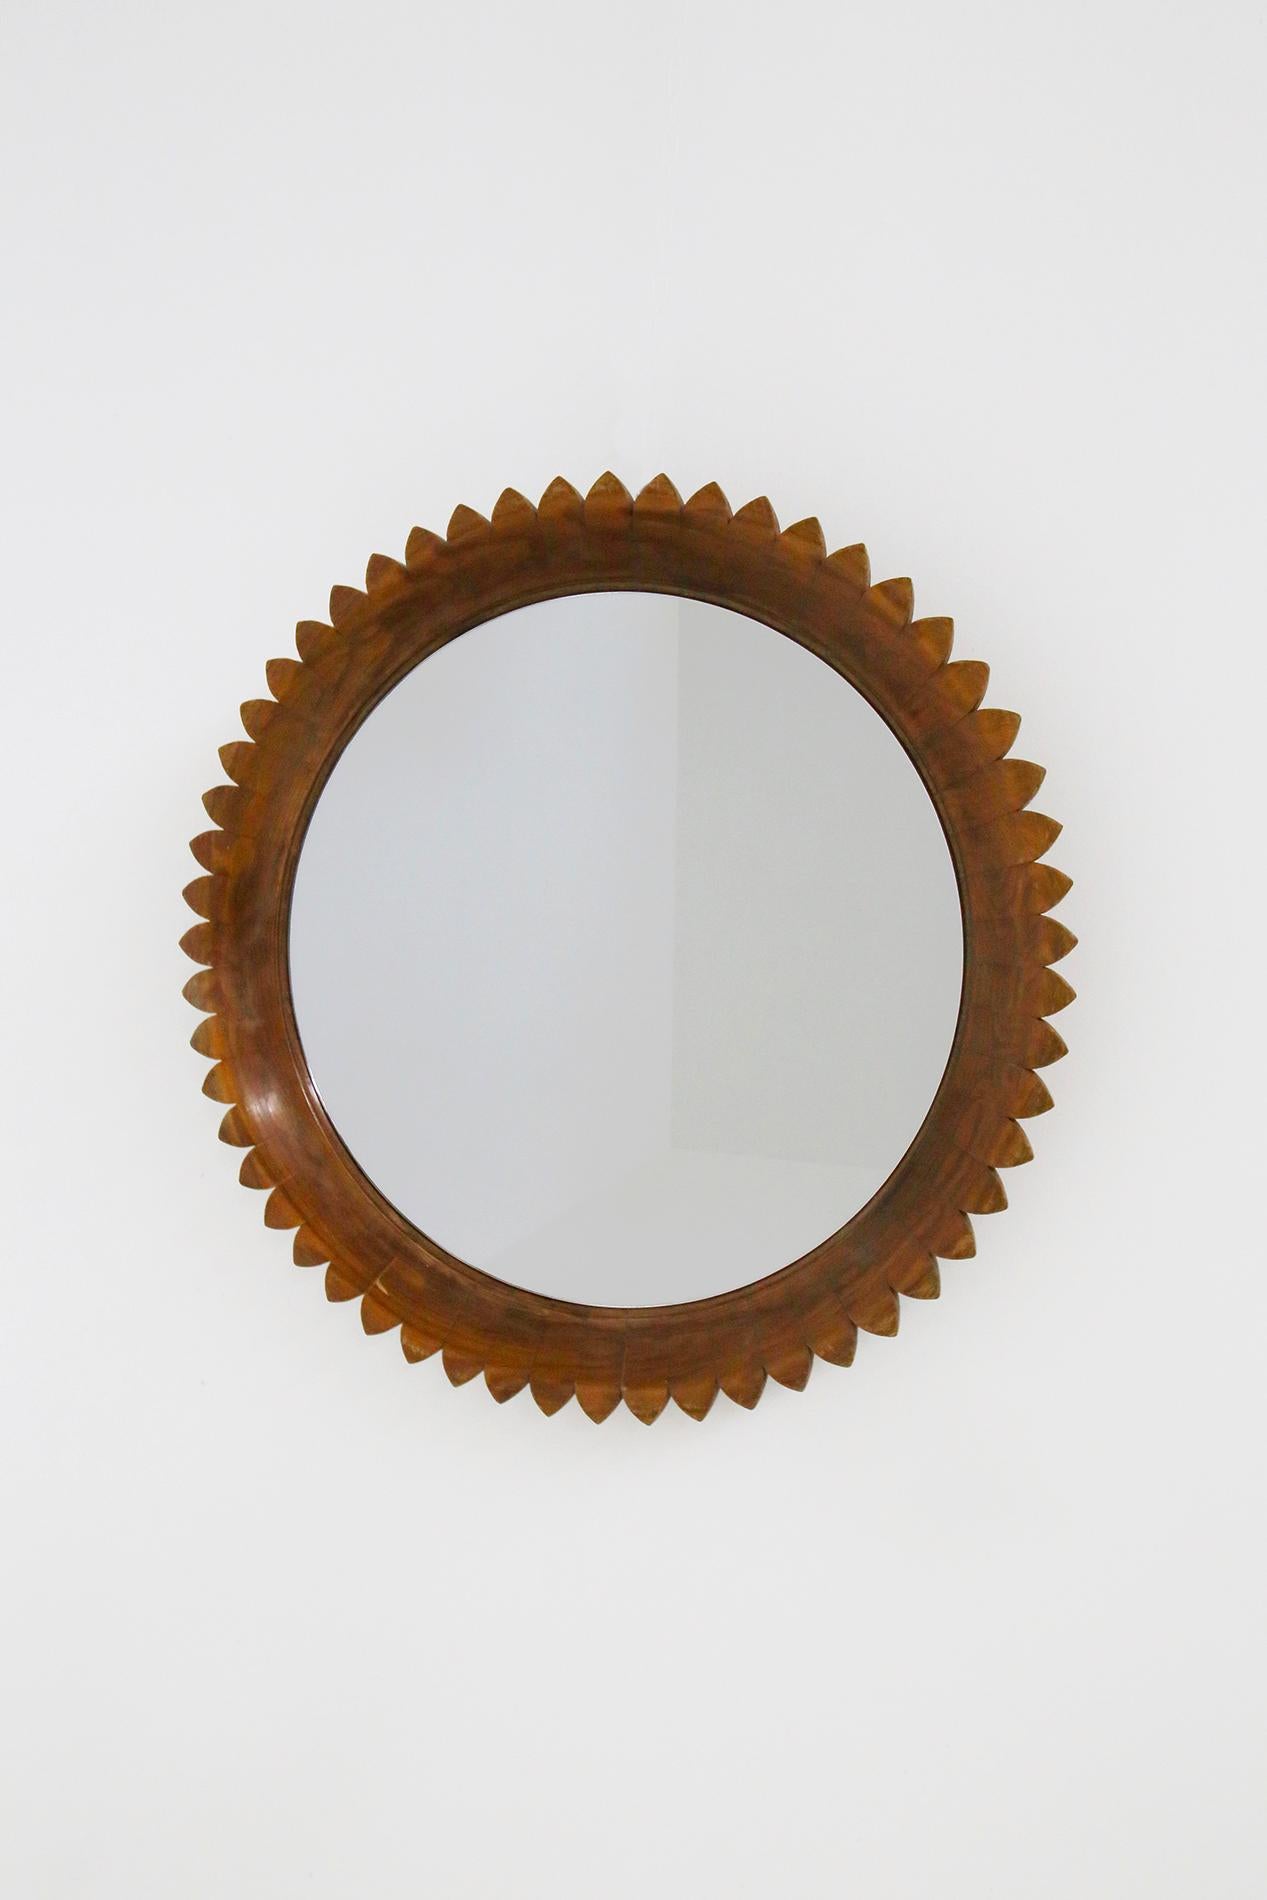 Elegant and important circular mirror made by the Italian manufacture Fratelli Marelli in 1950s. Turin.
The mirror is made of walnut wood with sun-shaped segments. Wonderful patina. For its beauty it looks like a sculptural work of art.
The mirror